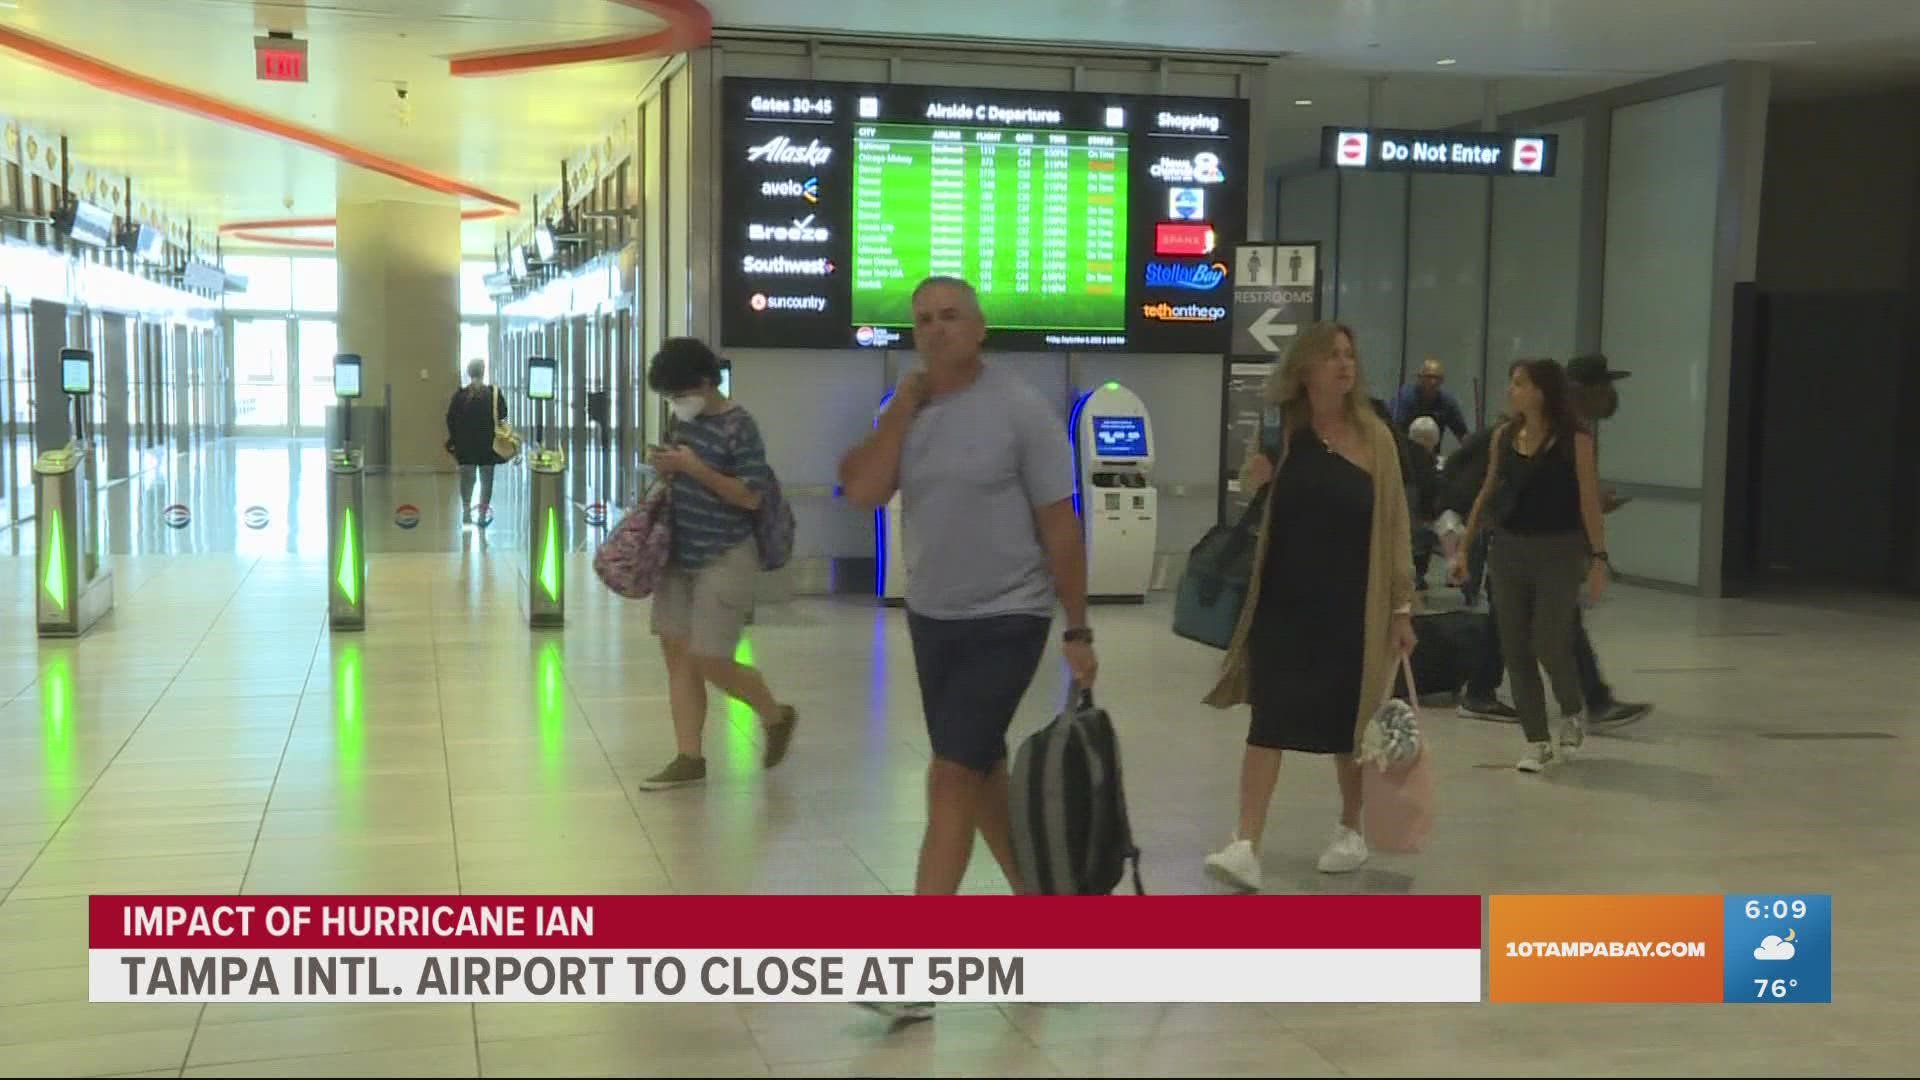 If you are flying out of Tampa International Airport on Tuesday, the airport recommends arriving two hours early.